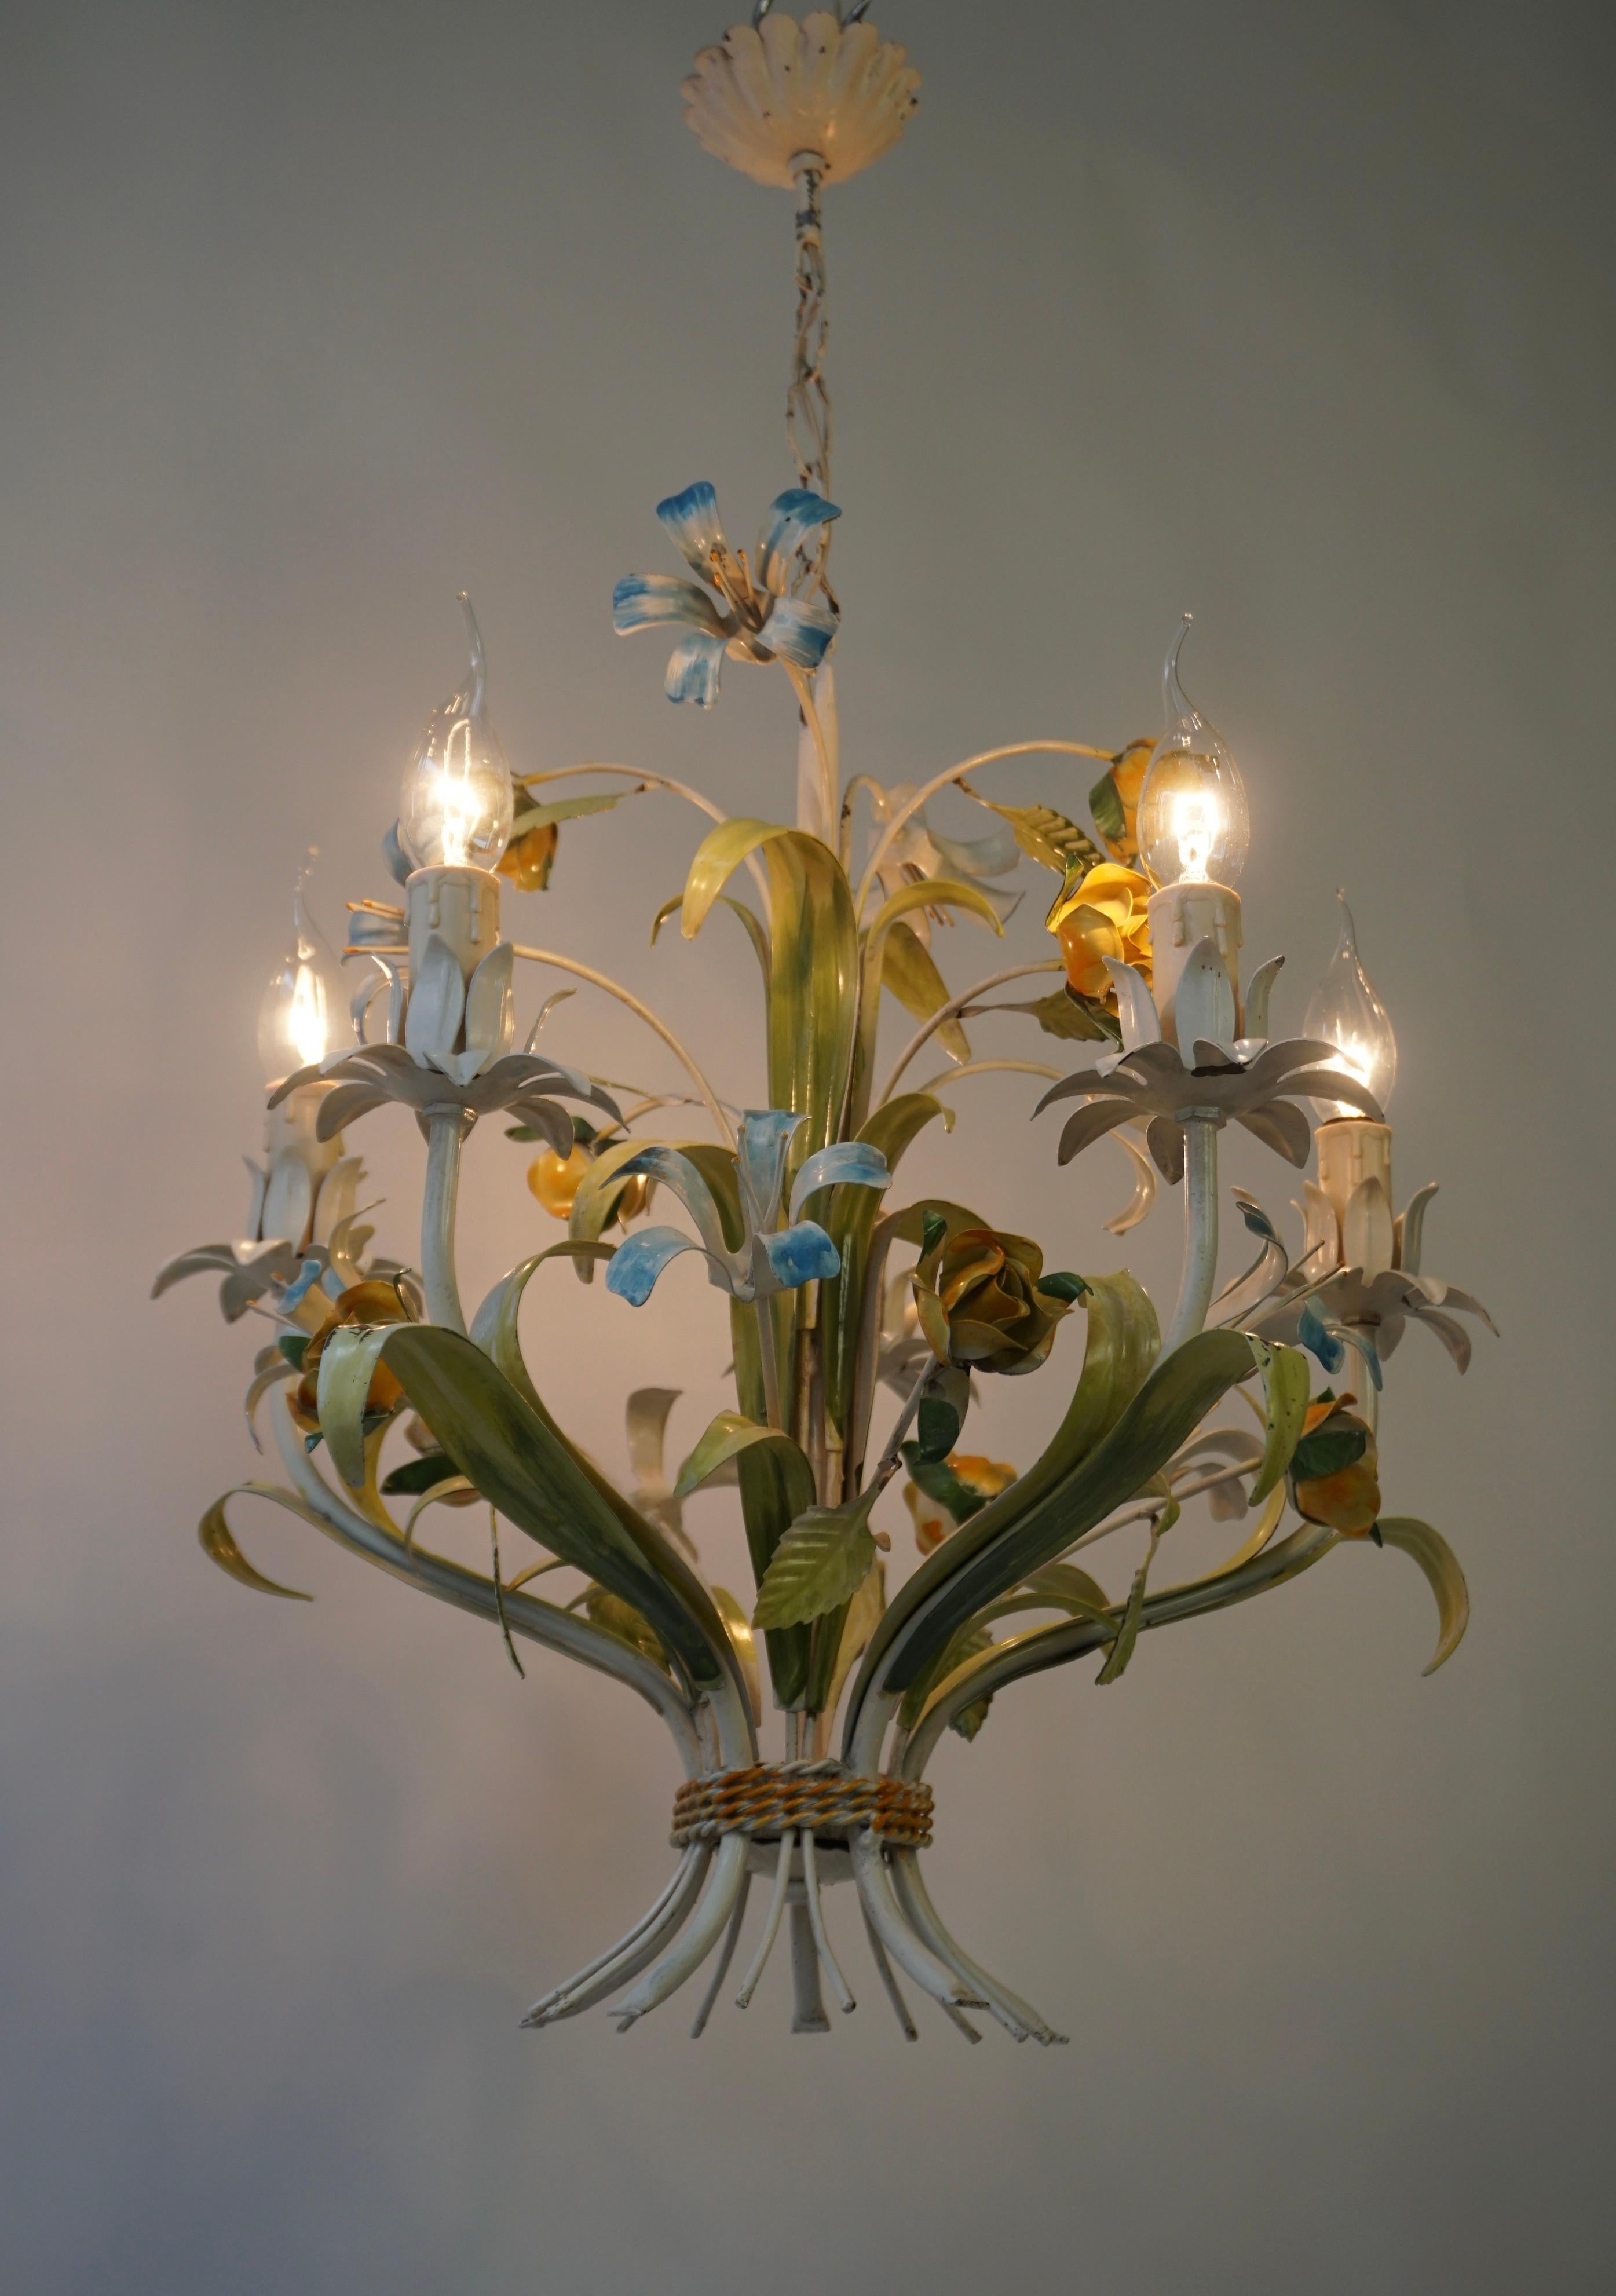 Vintage 1950s hanging lamp from Italy with striking colors, made in the shape of a bouquet of lilies and roses.
The lamp has five light points and has a warm, attractive and romantic appearance.

A  Hollywood Regency tole five-armed pendant light